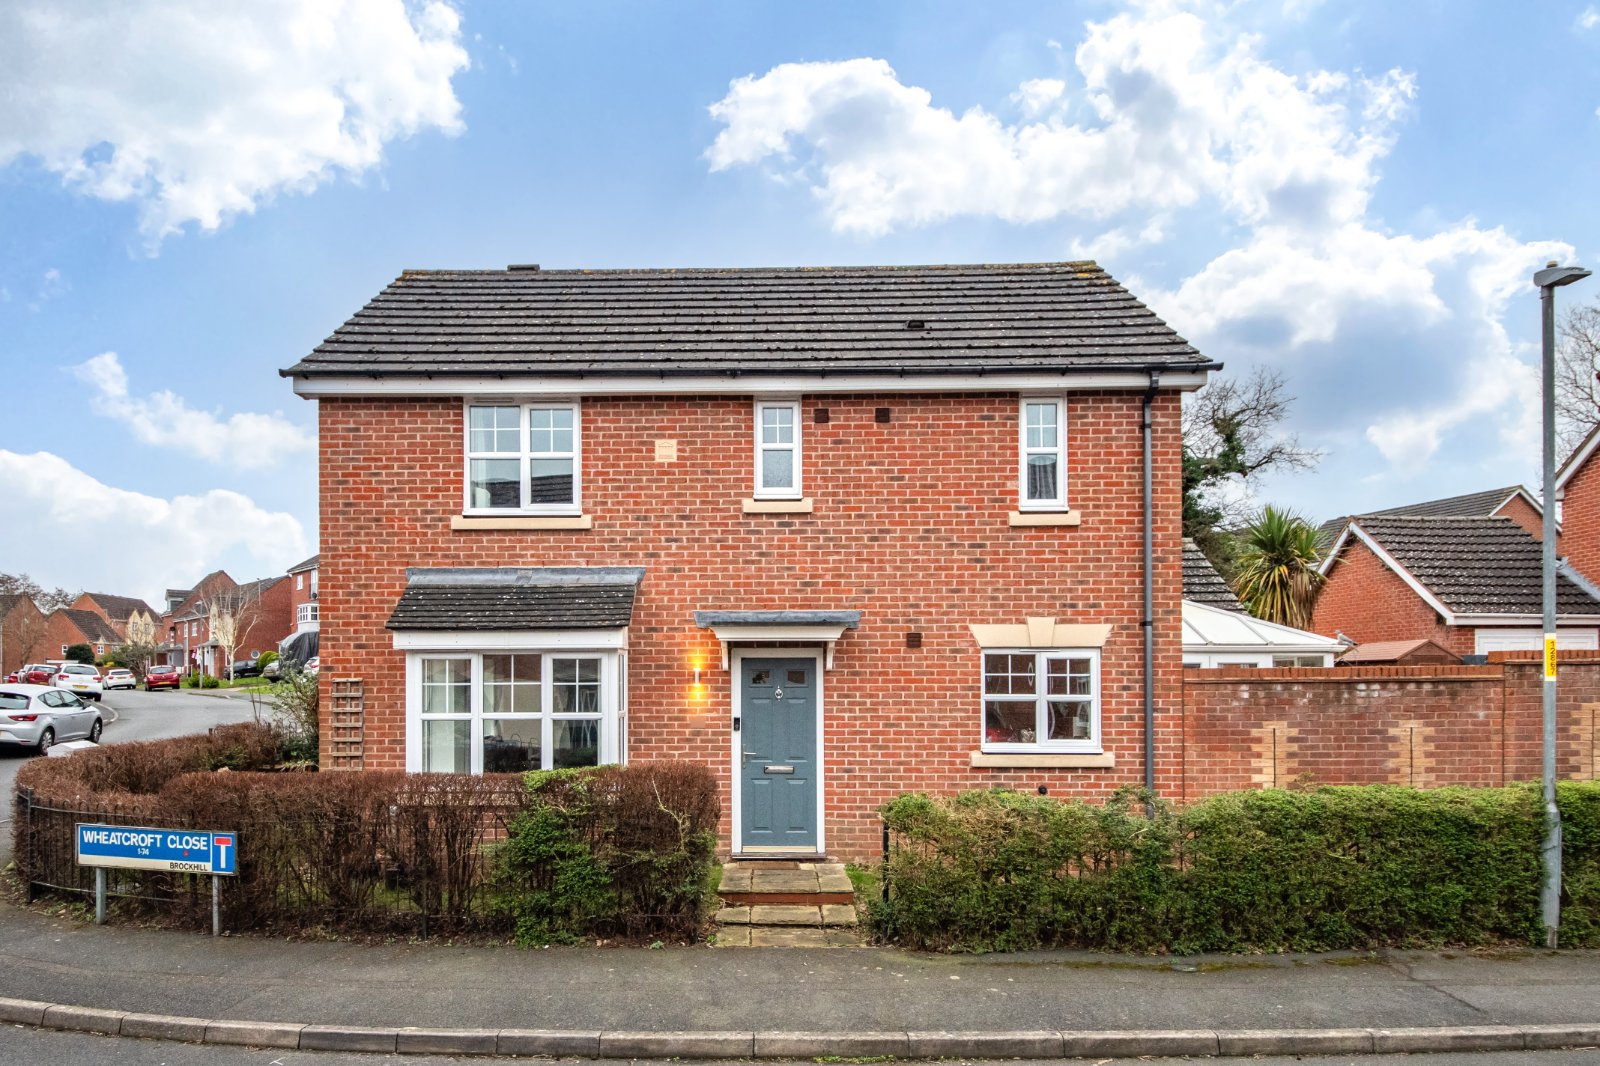 3 bed house for sale in Wheatcroft Close, Redditch  - Property Image 2